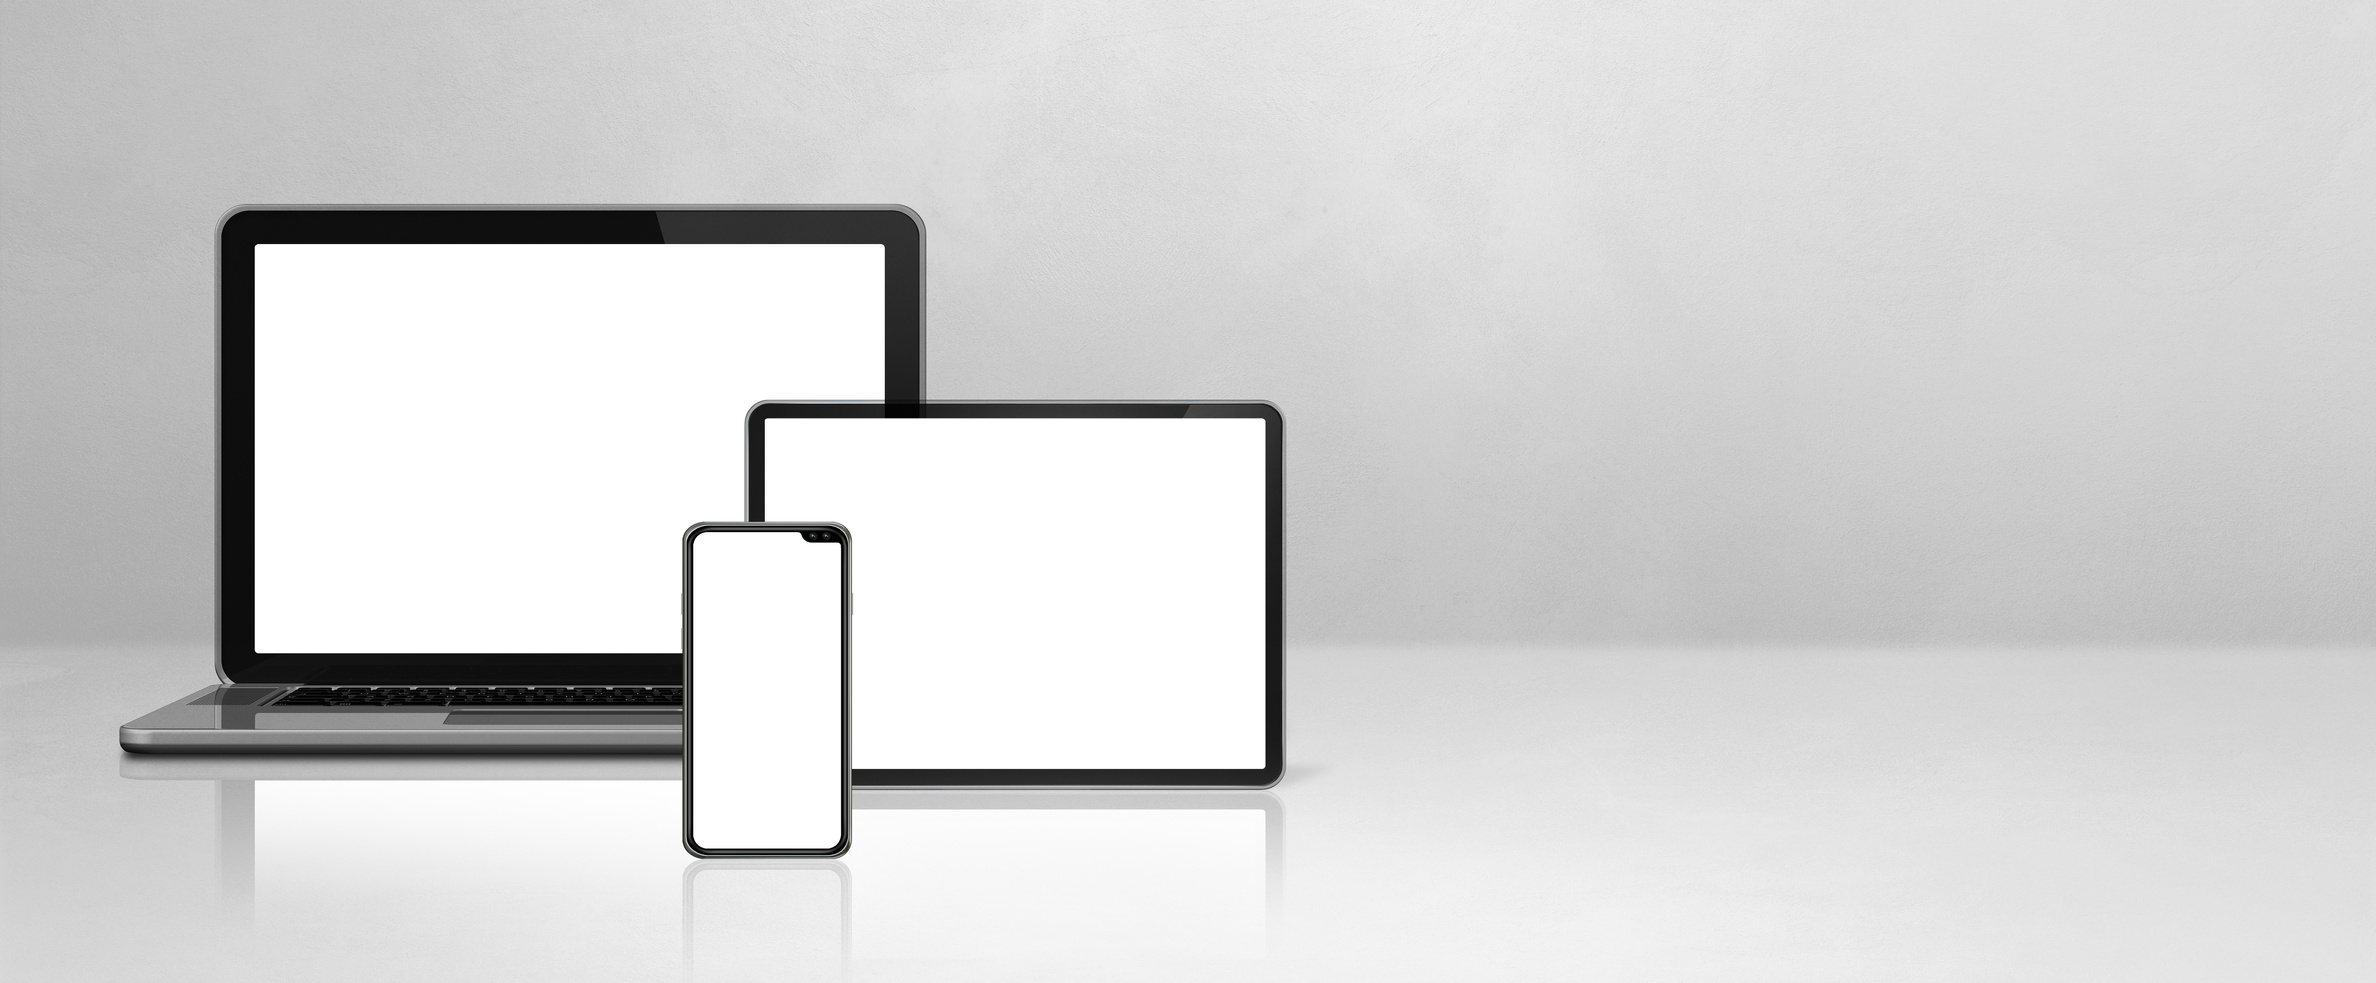 Mobile Devices Mockup 